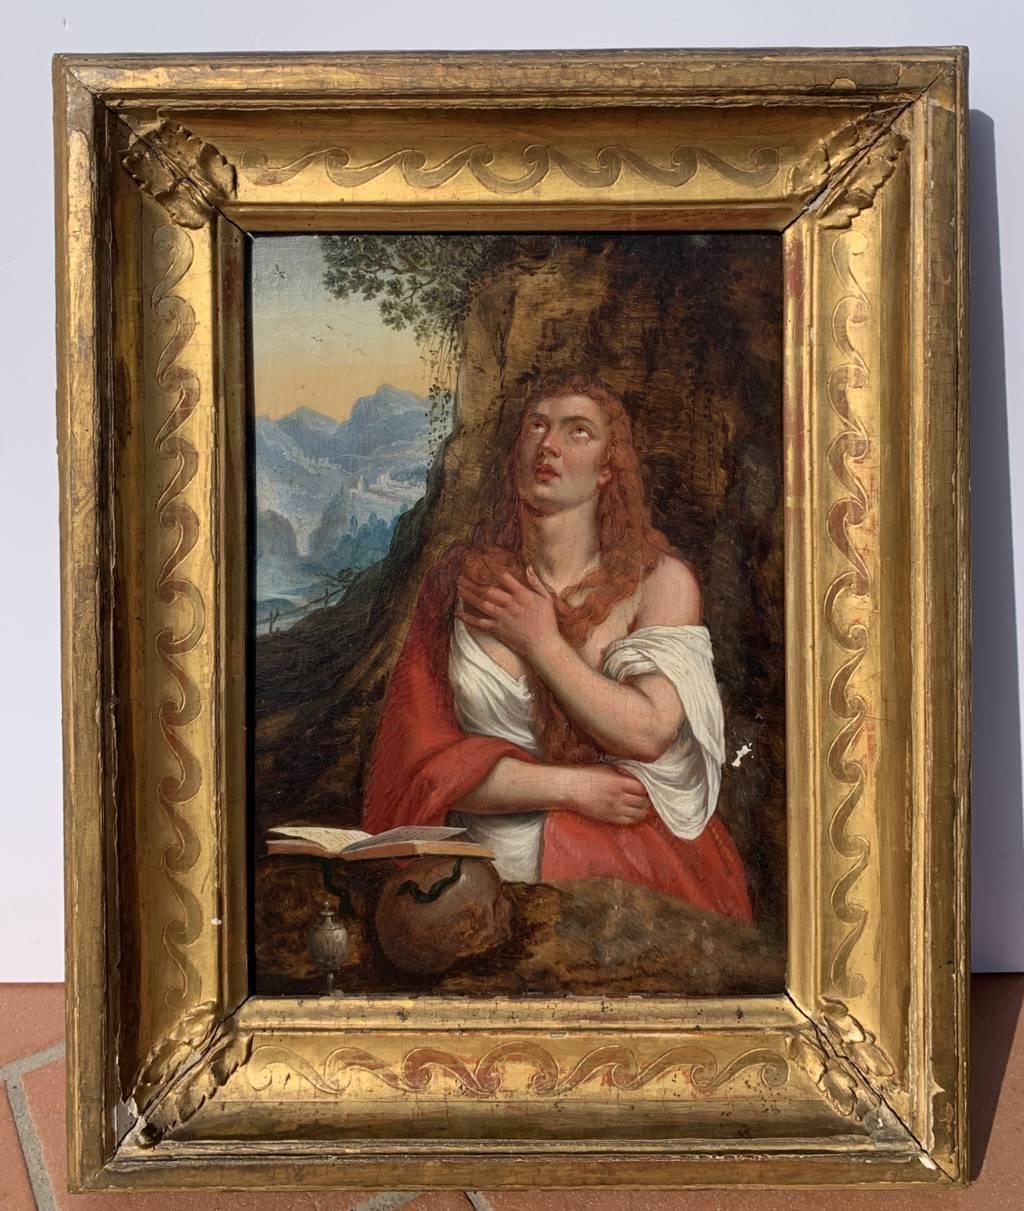 Titian workshop(Venetian school) - 17th century figure painting - Mary Magdalene - Painting by Unknown